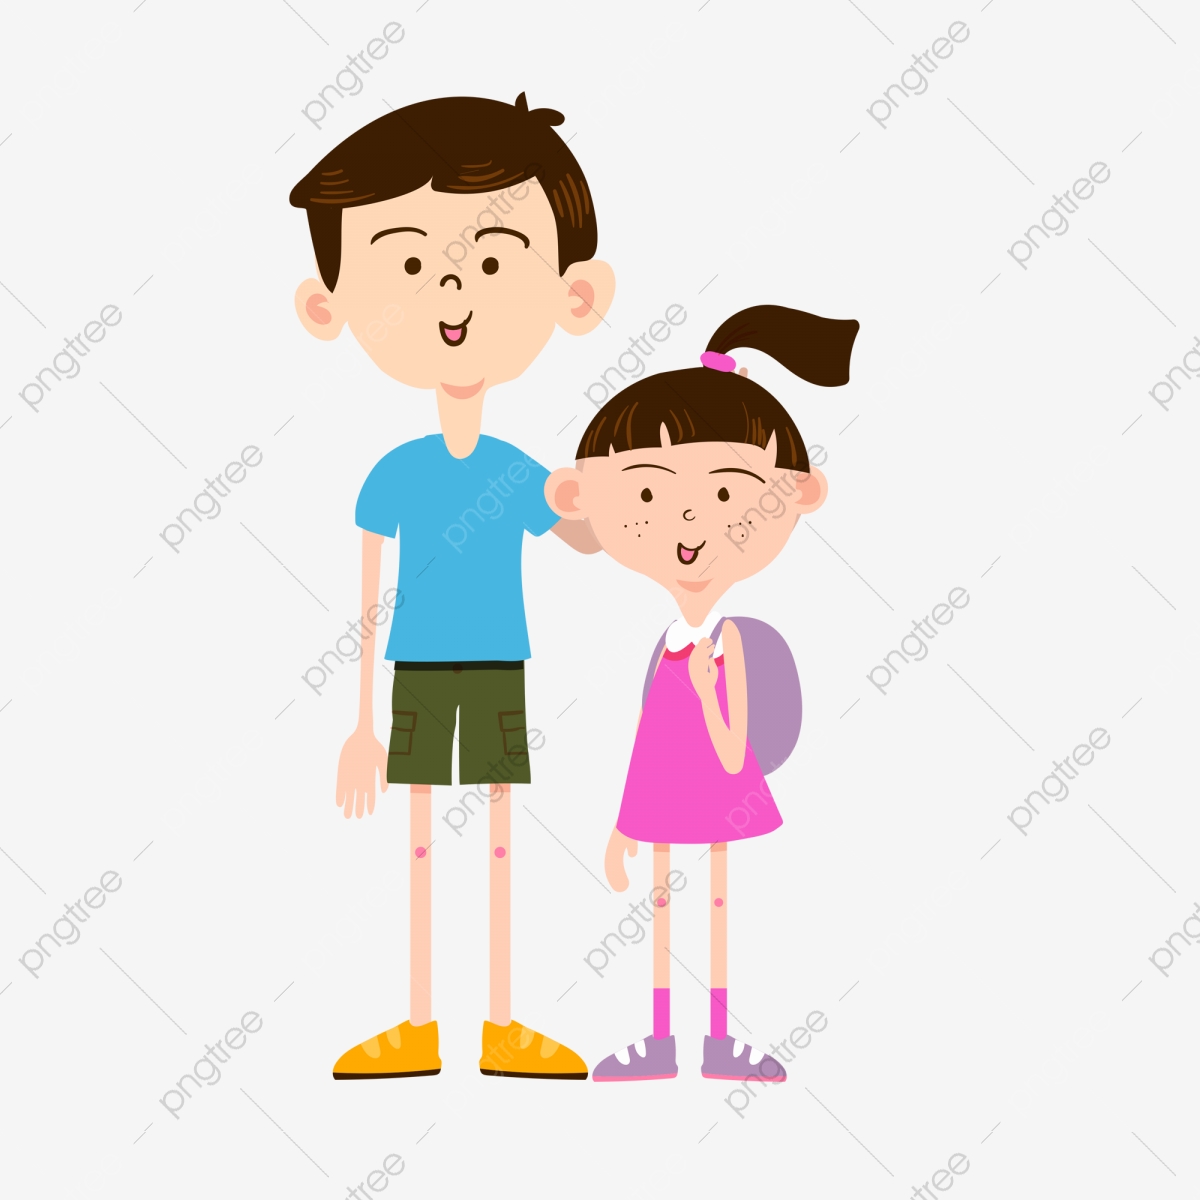 brothers clipart person